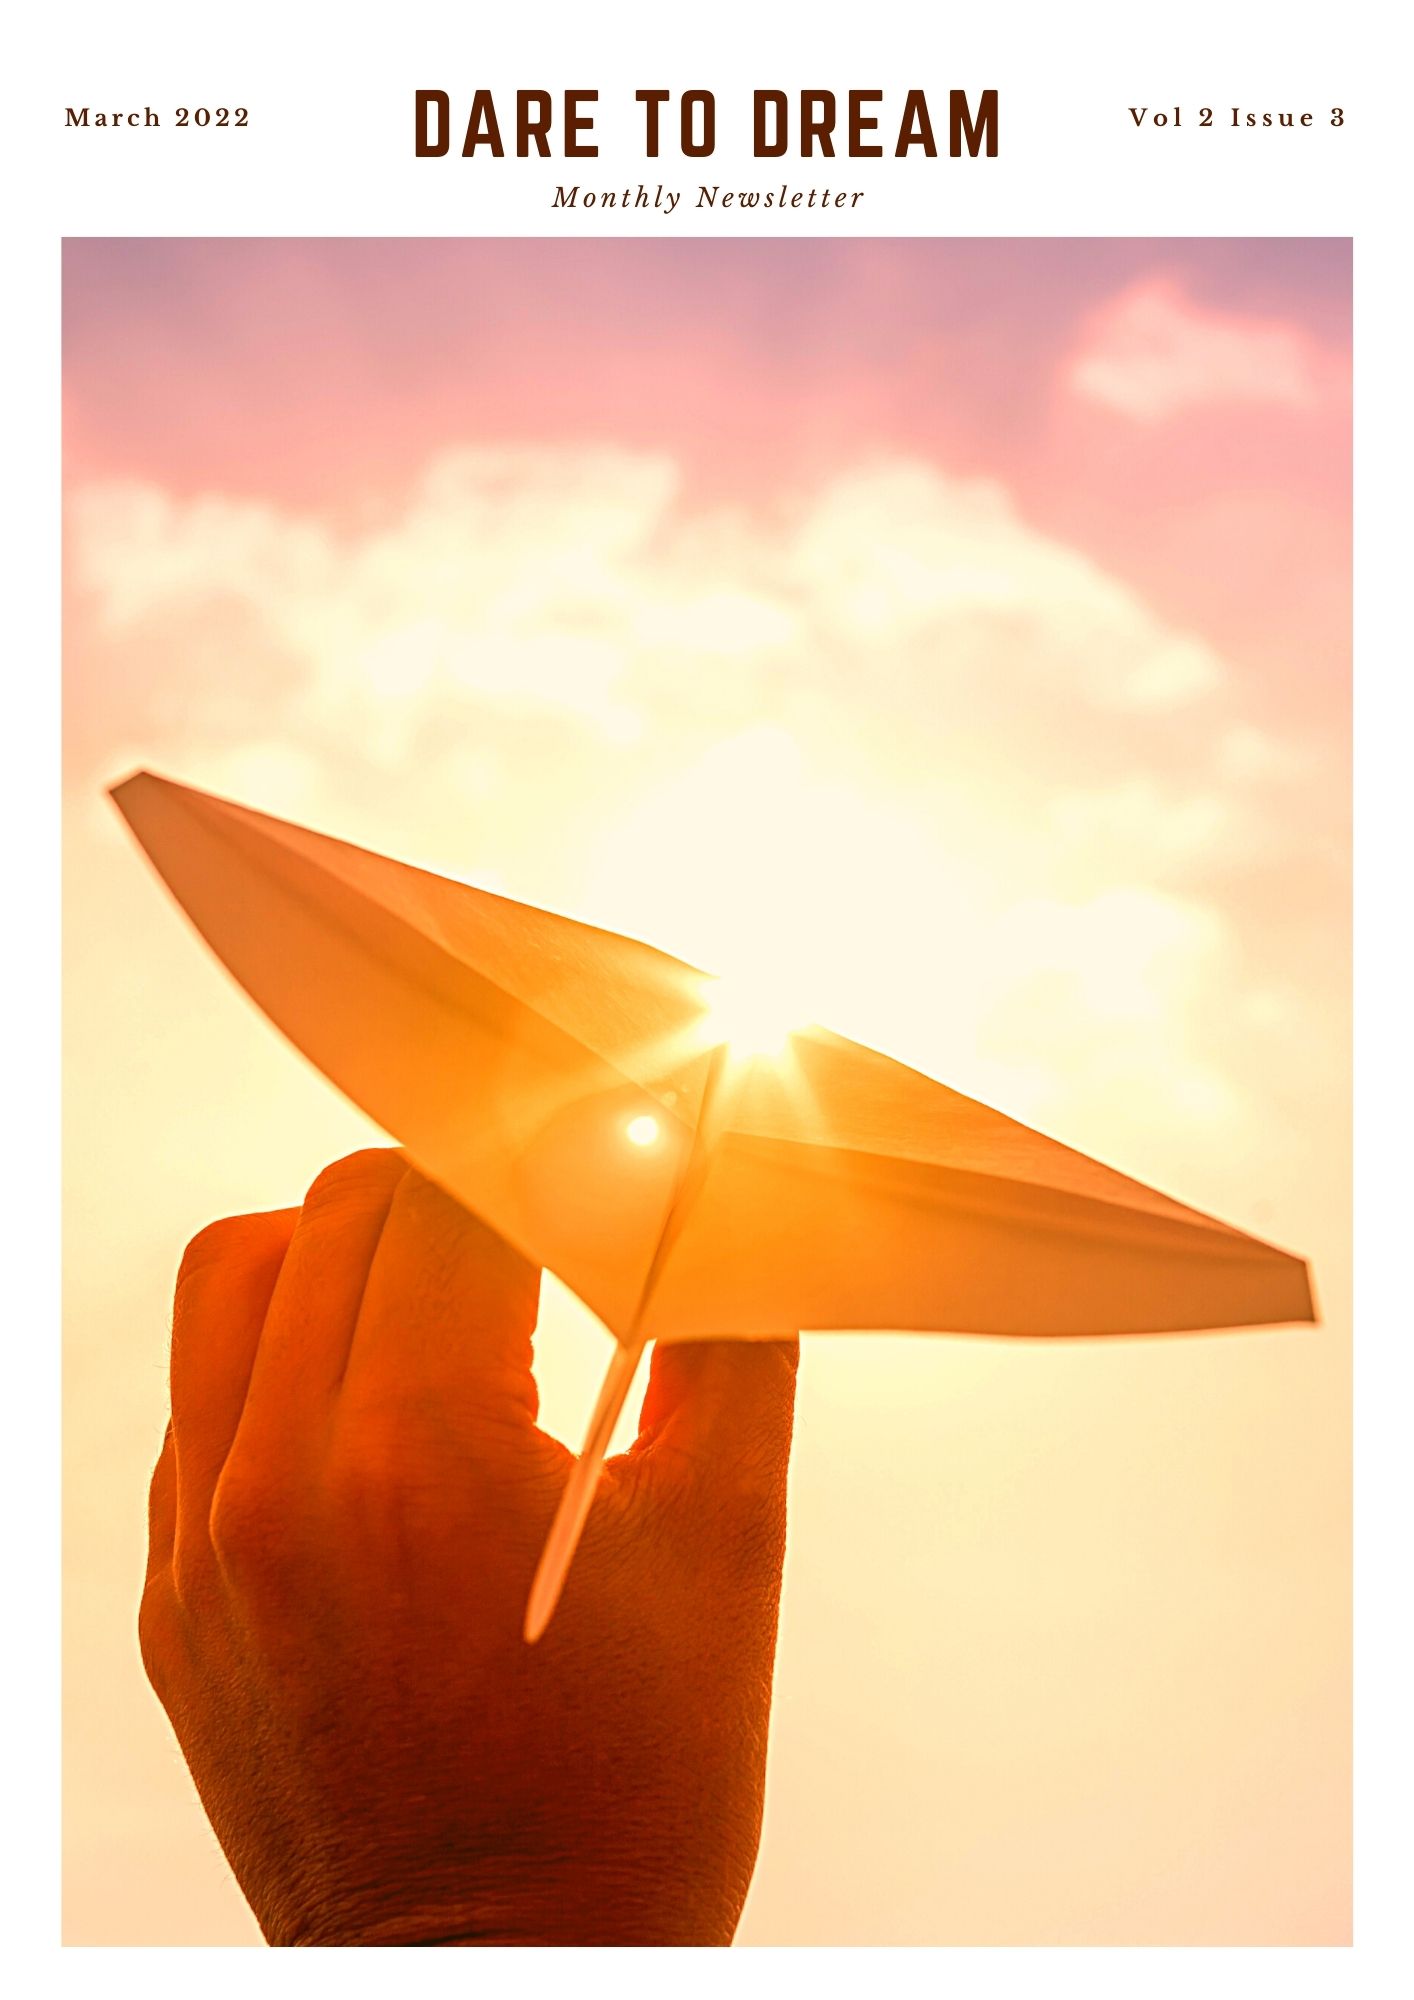 The title Dare to Dream and Monthly Newsletter below that is written in the middle on top, March 2022 on the top left corner and Vol 2 , issue 3 on the top right corner. Below is an image with a hand holding a paper rocket pointed at the sun covering the whole page.